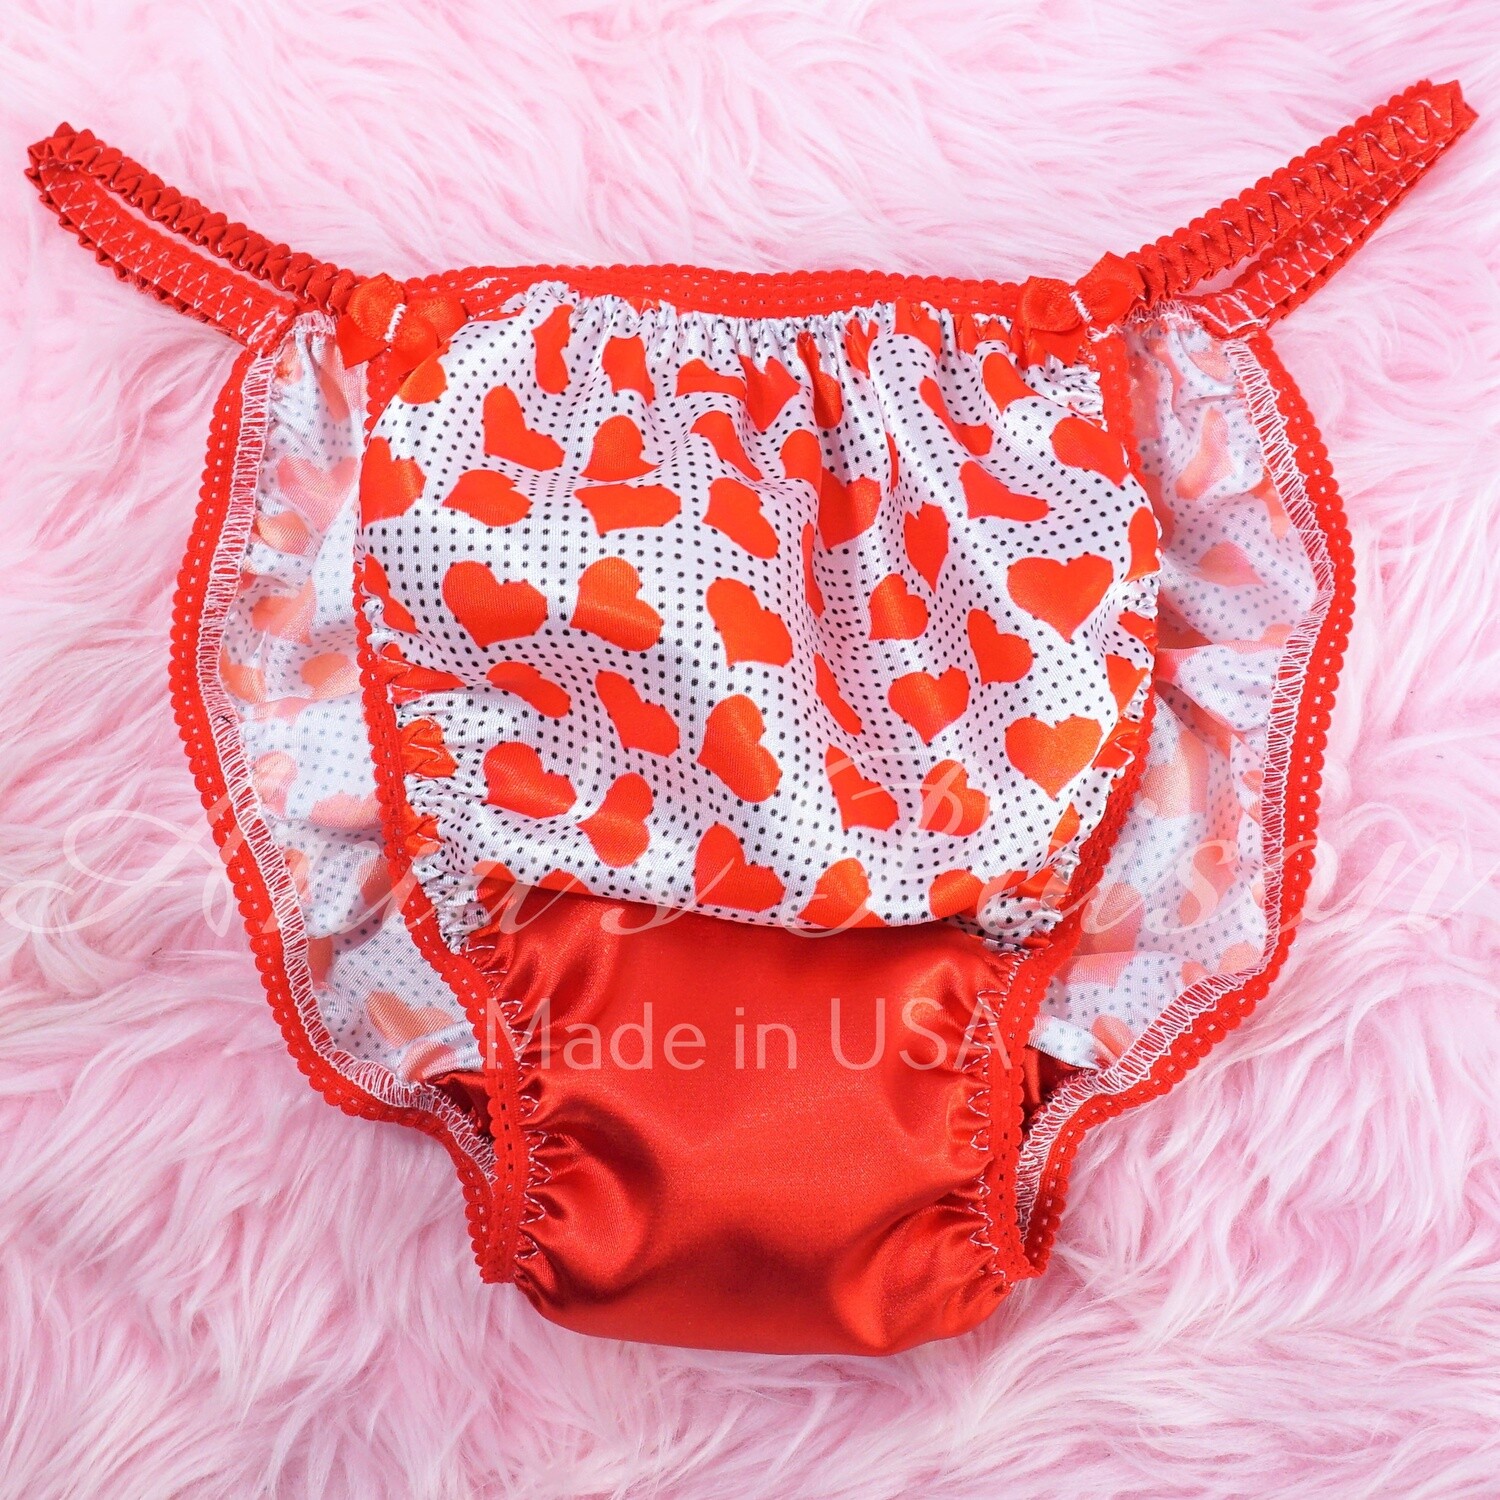 Valentine's Day RED with Swiss Dot Hearts Ania's Poison Cut sissy MENS SATIN Beautiful Shiny Silky wet look Mens holiday string Bikini panties